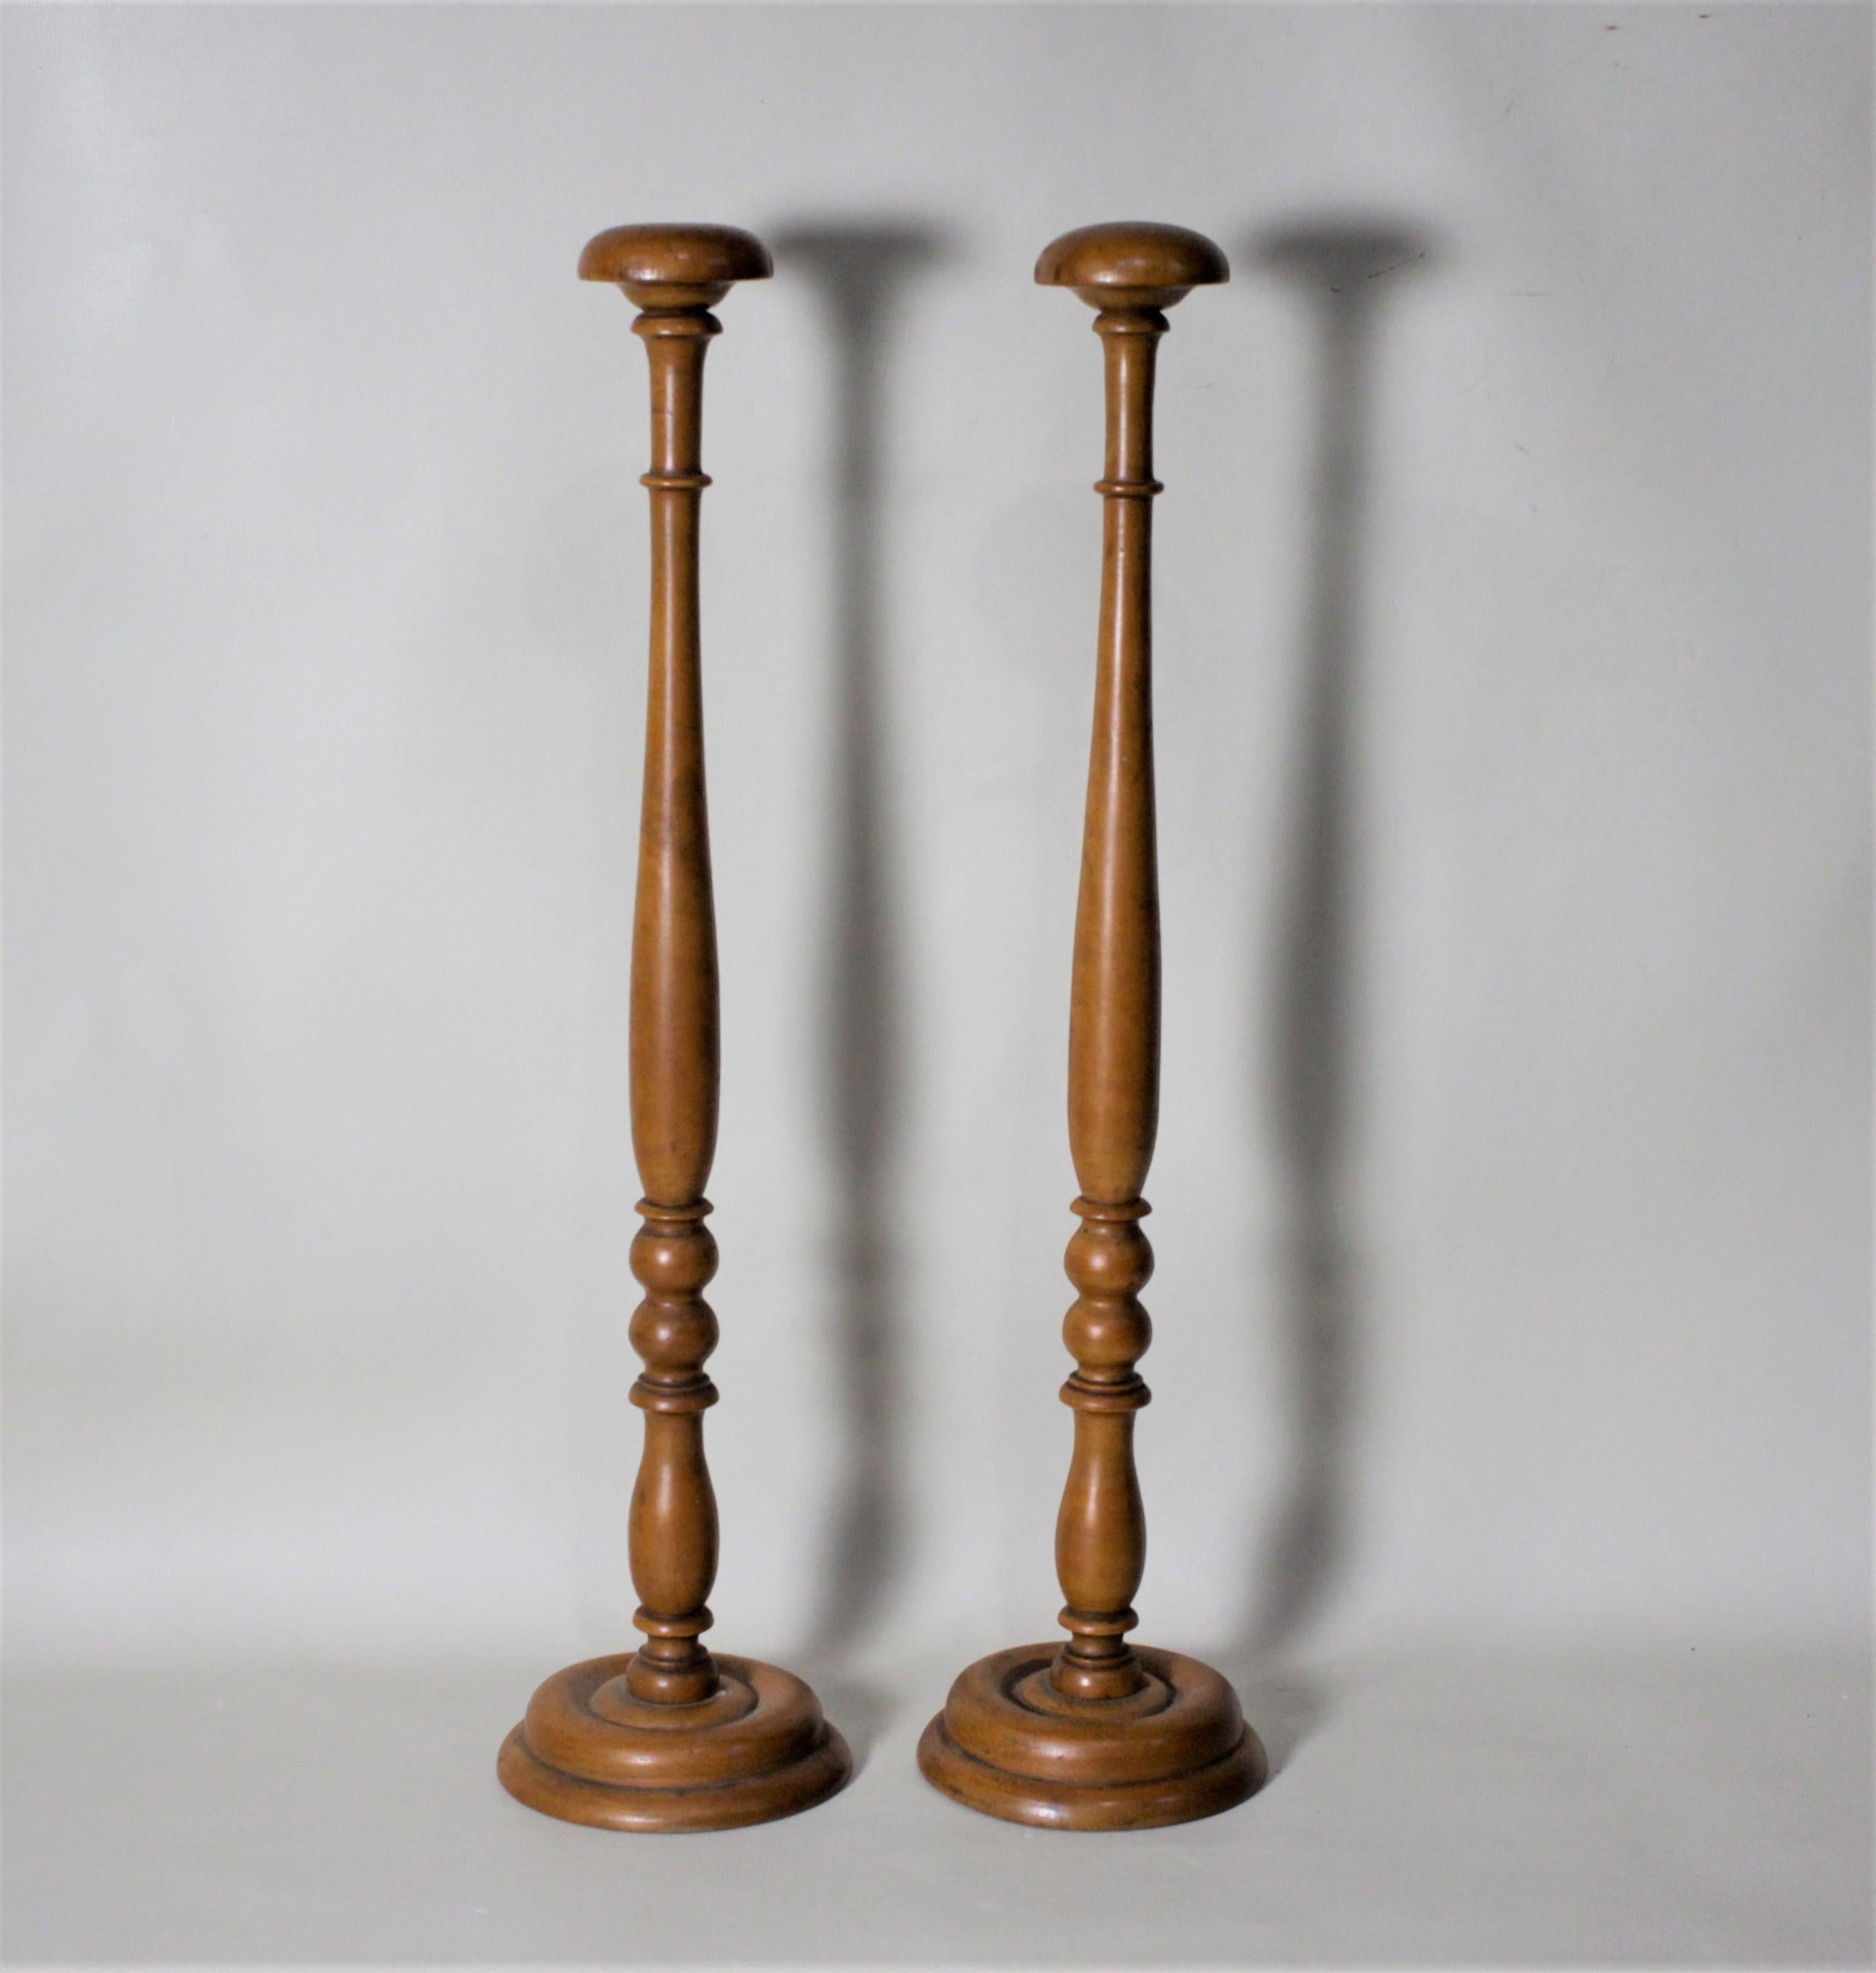 This antique pair of turned wooden hat stands show no maker's marks, but presumed to have been made in the United States in a Federalist style. Each of the two posts of these stands is mounted on a turned wooden base. The stands are stamped with